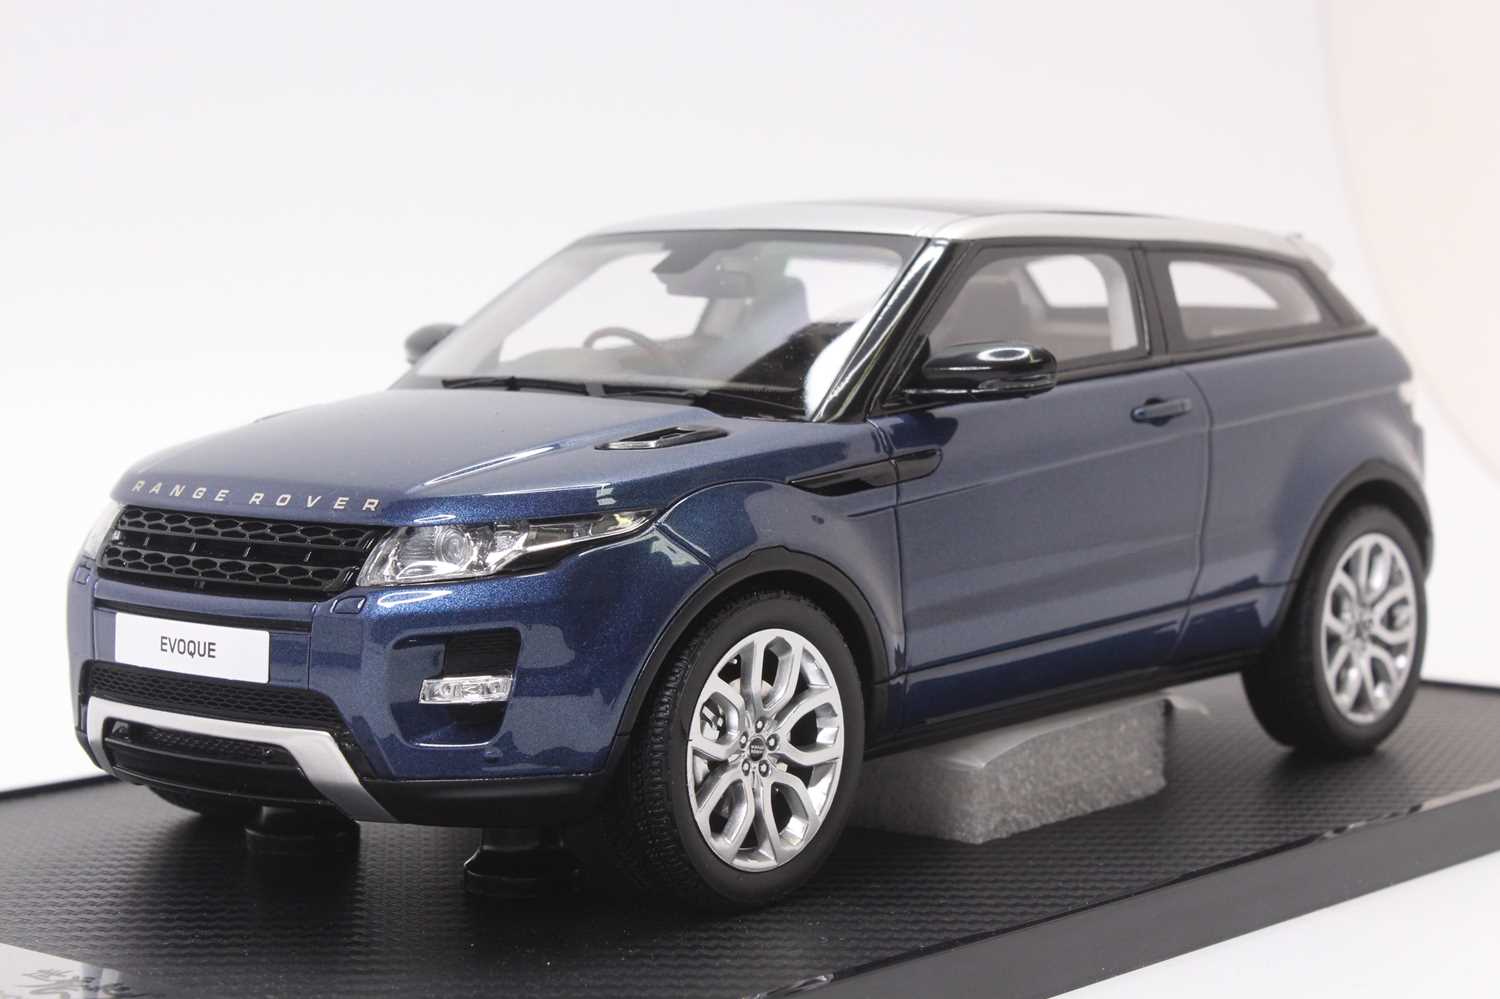 A Century Dragon 1/18 scale model of a resin 2011 Range Rover Evoque, finished in metallic blue, and - Image 3 of 3